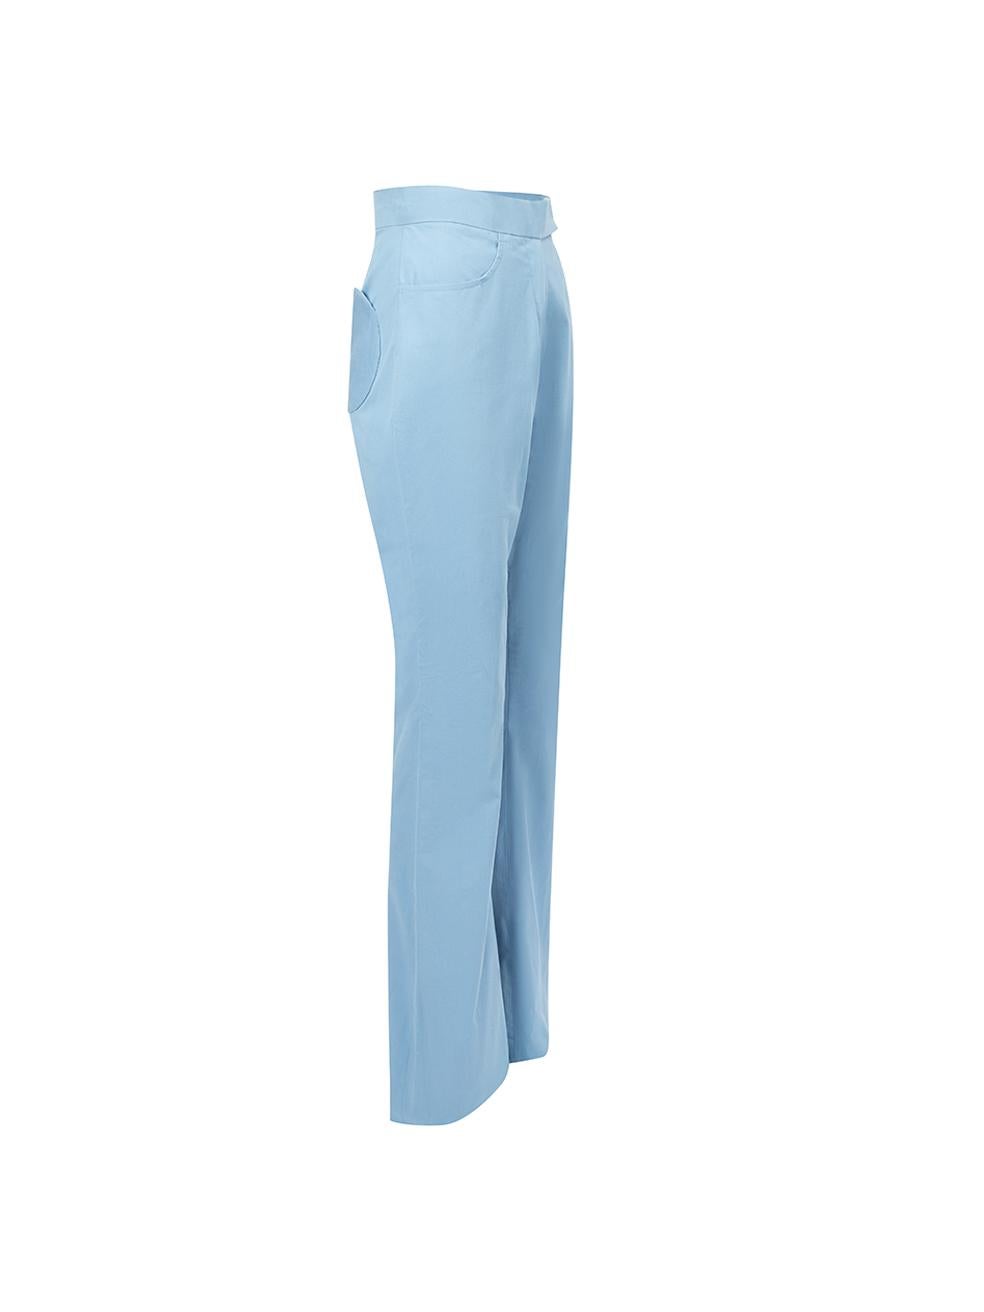 CONDITION is Very good. Minimal wear to trousers is evident. Minimal wear to the outer fabric at the bottom of trousers on this used Sanne designer sample item. 
 
 Details
  Designer sample item
 Blue
 Cotton
 Flared long trousers
 High rise
 Front